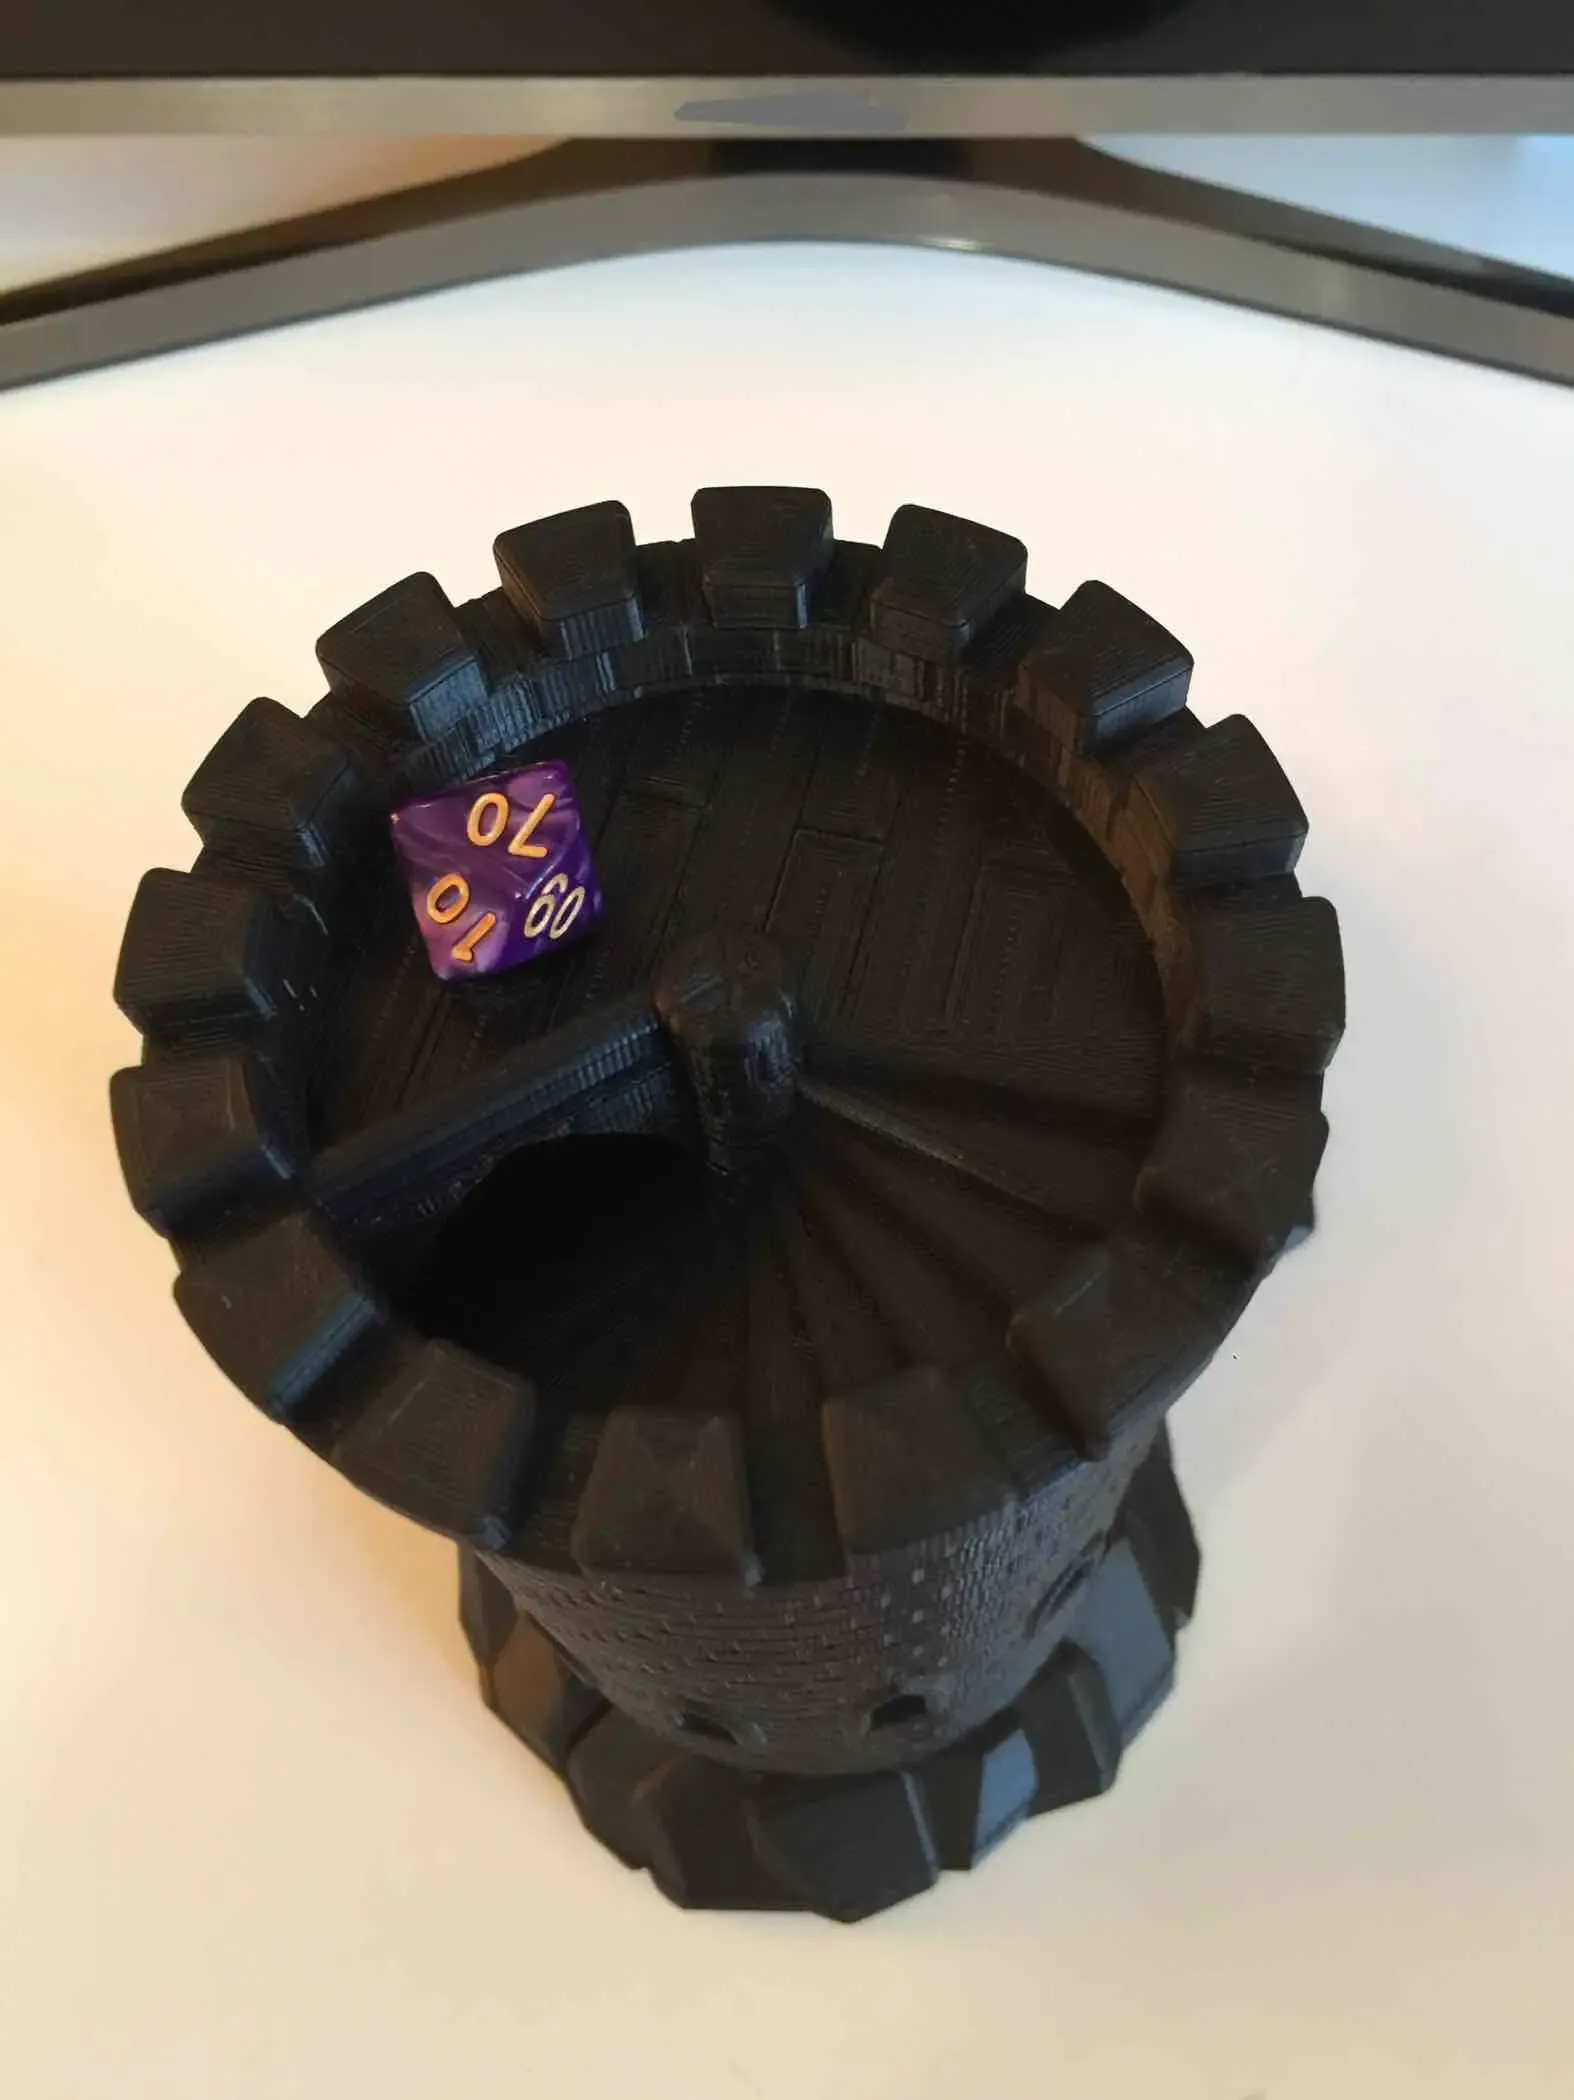 DnD Dice Tower | Dice Tower for Board Games | Dice Tower